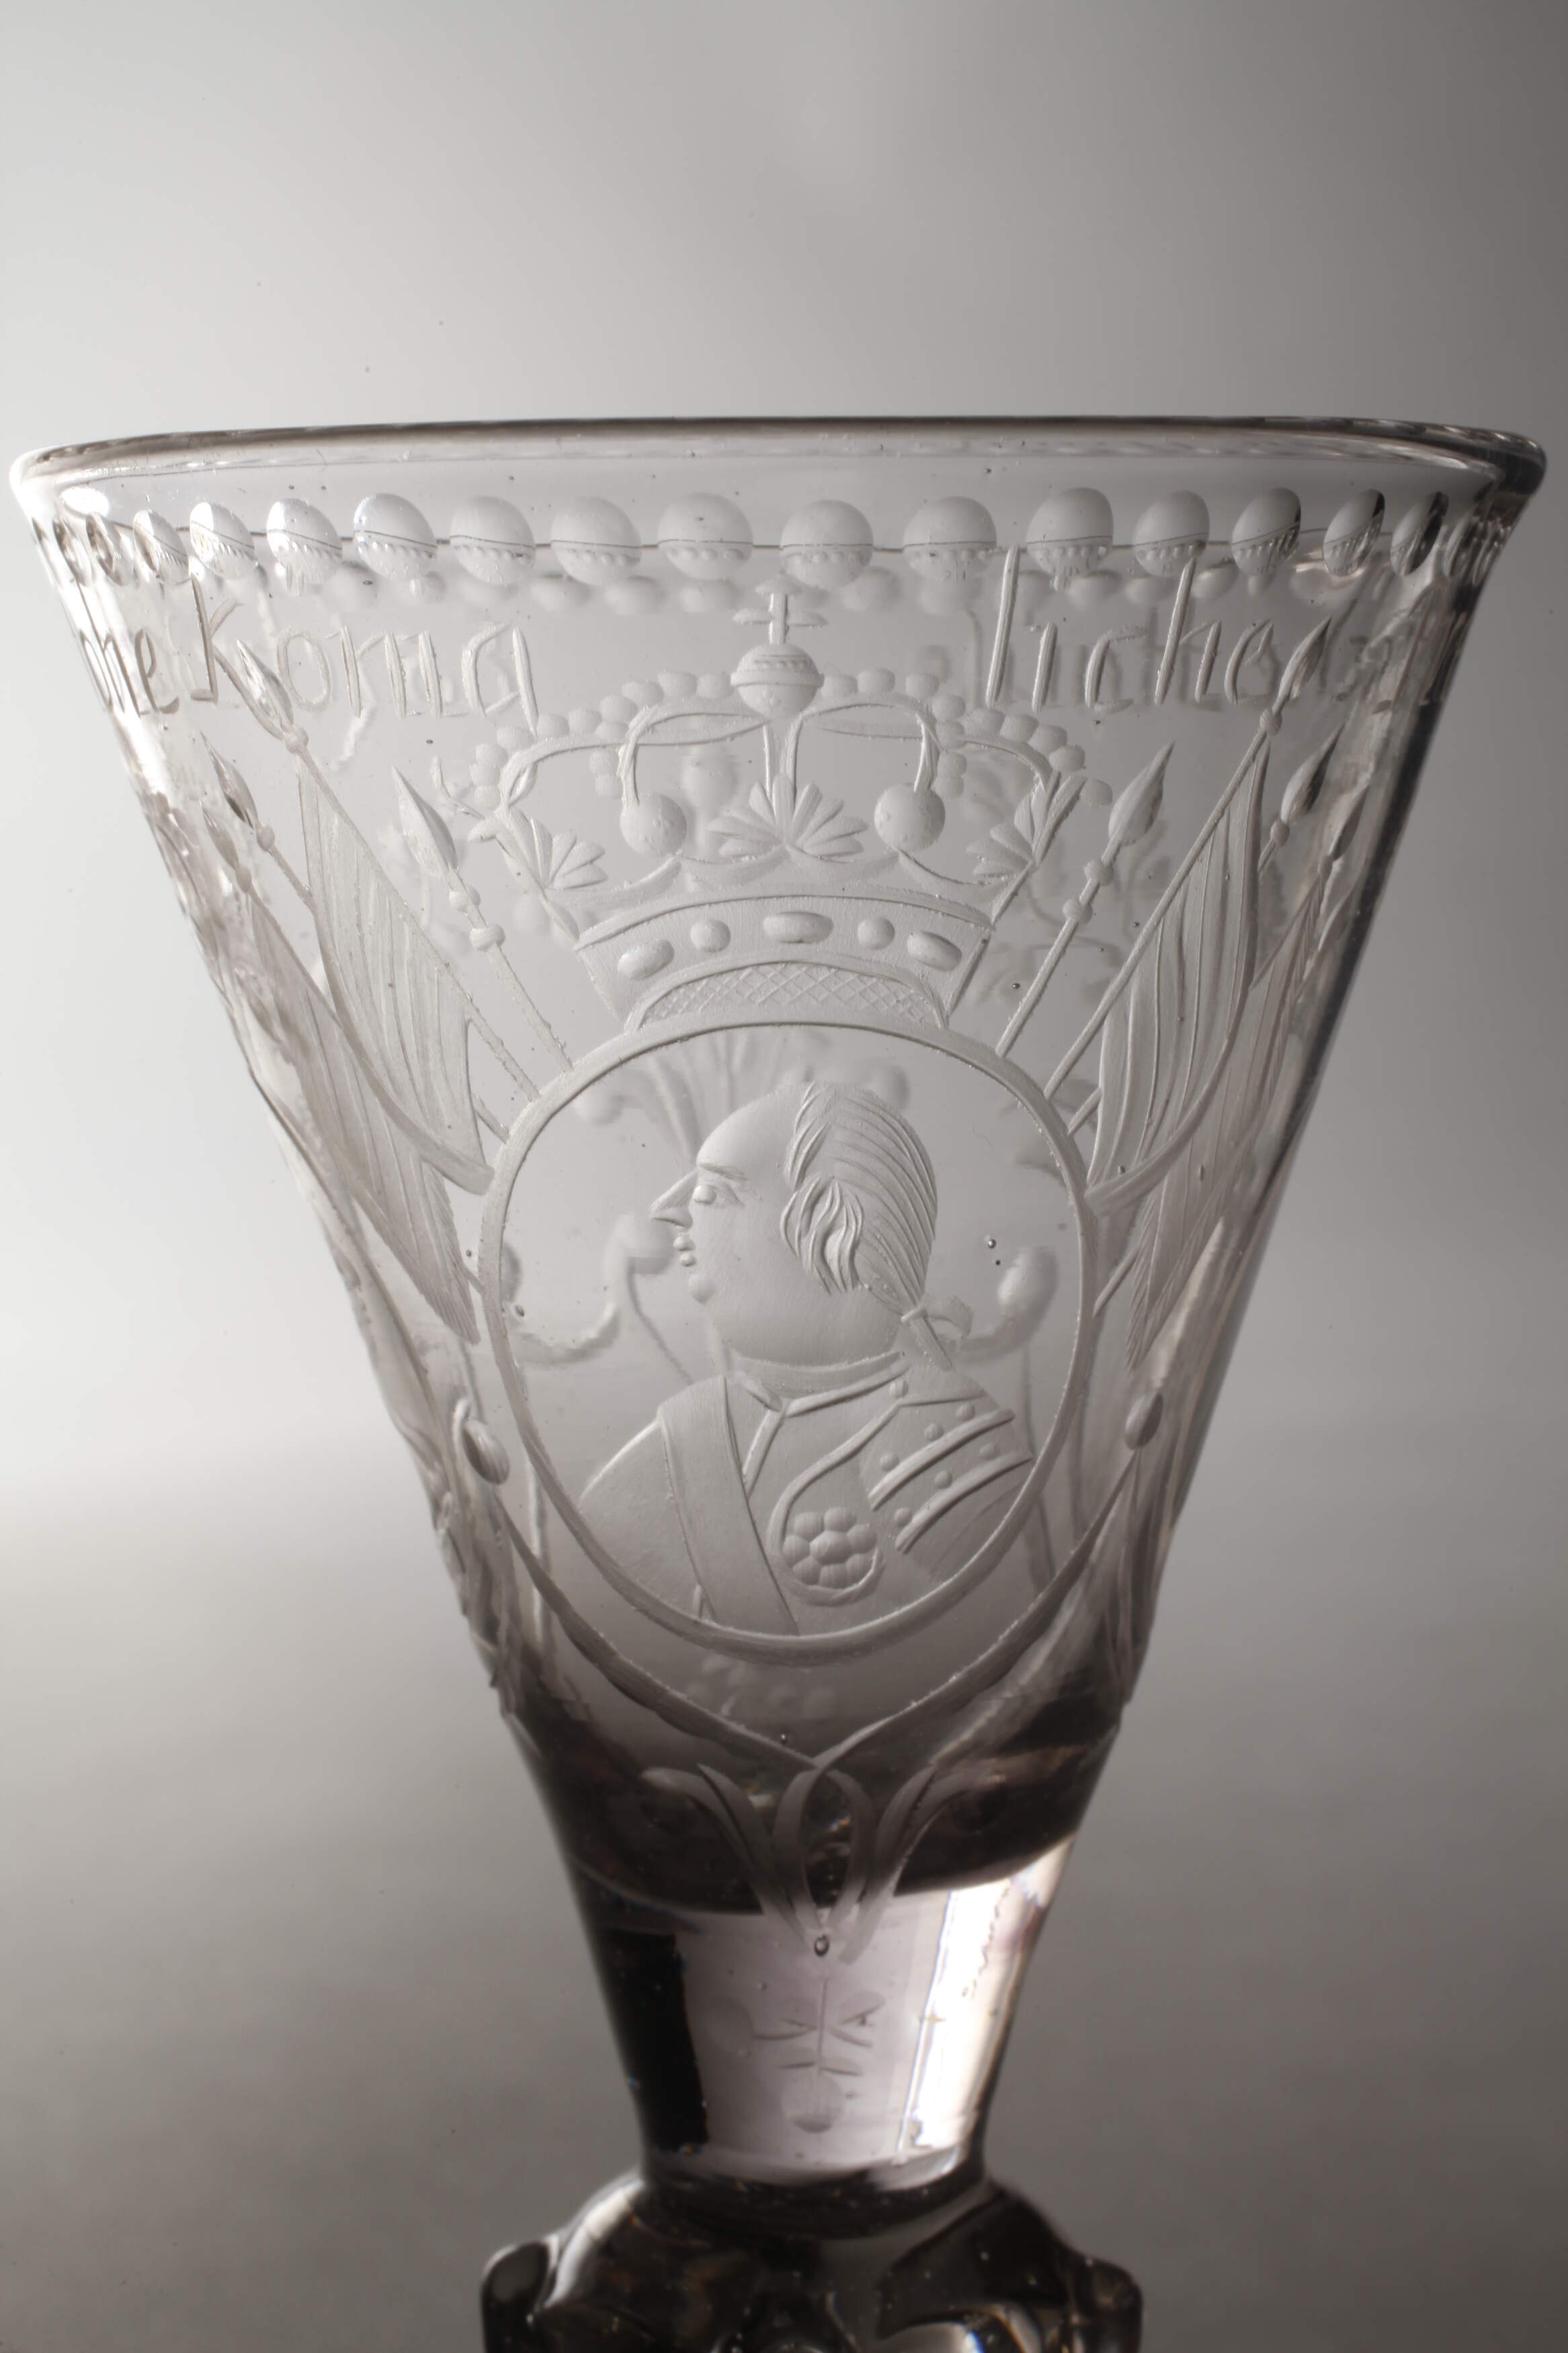 Spouted goblet from the Prussian royal house - Image 3 of 6